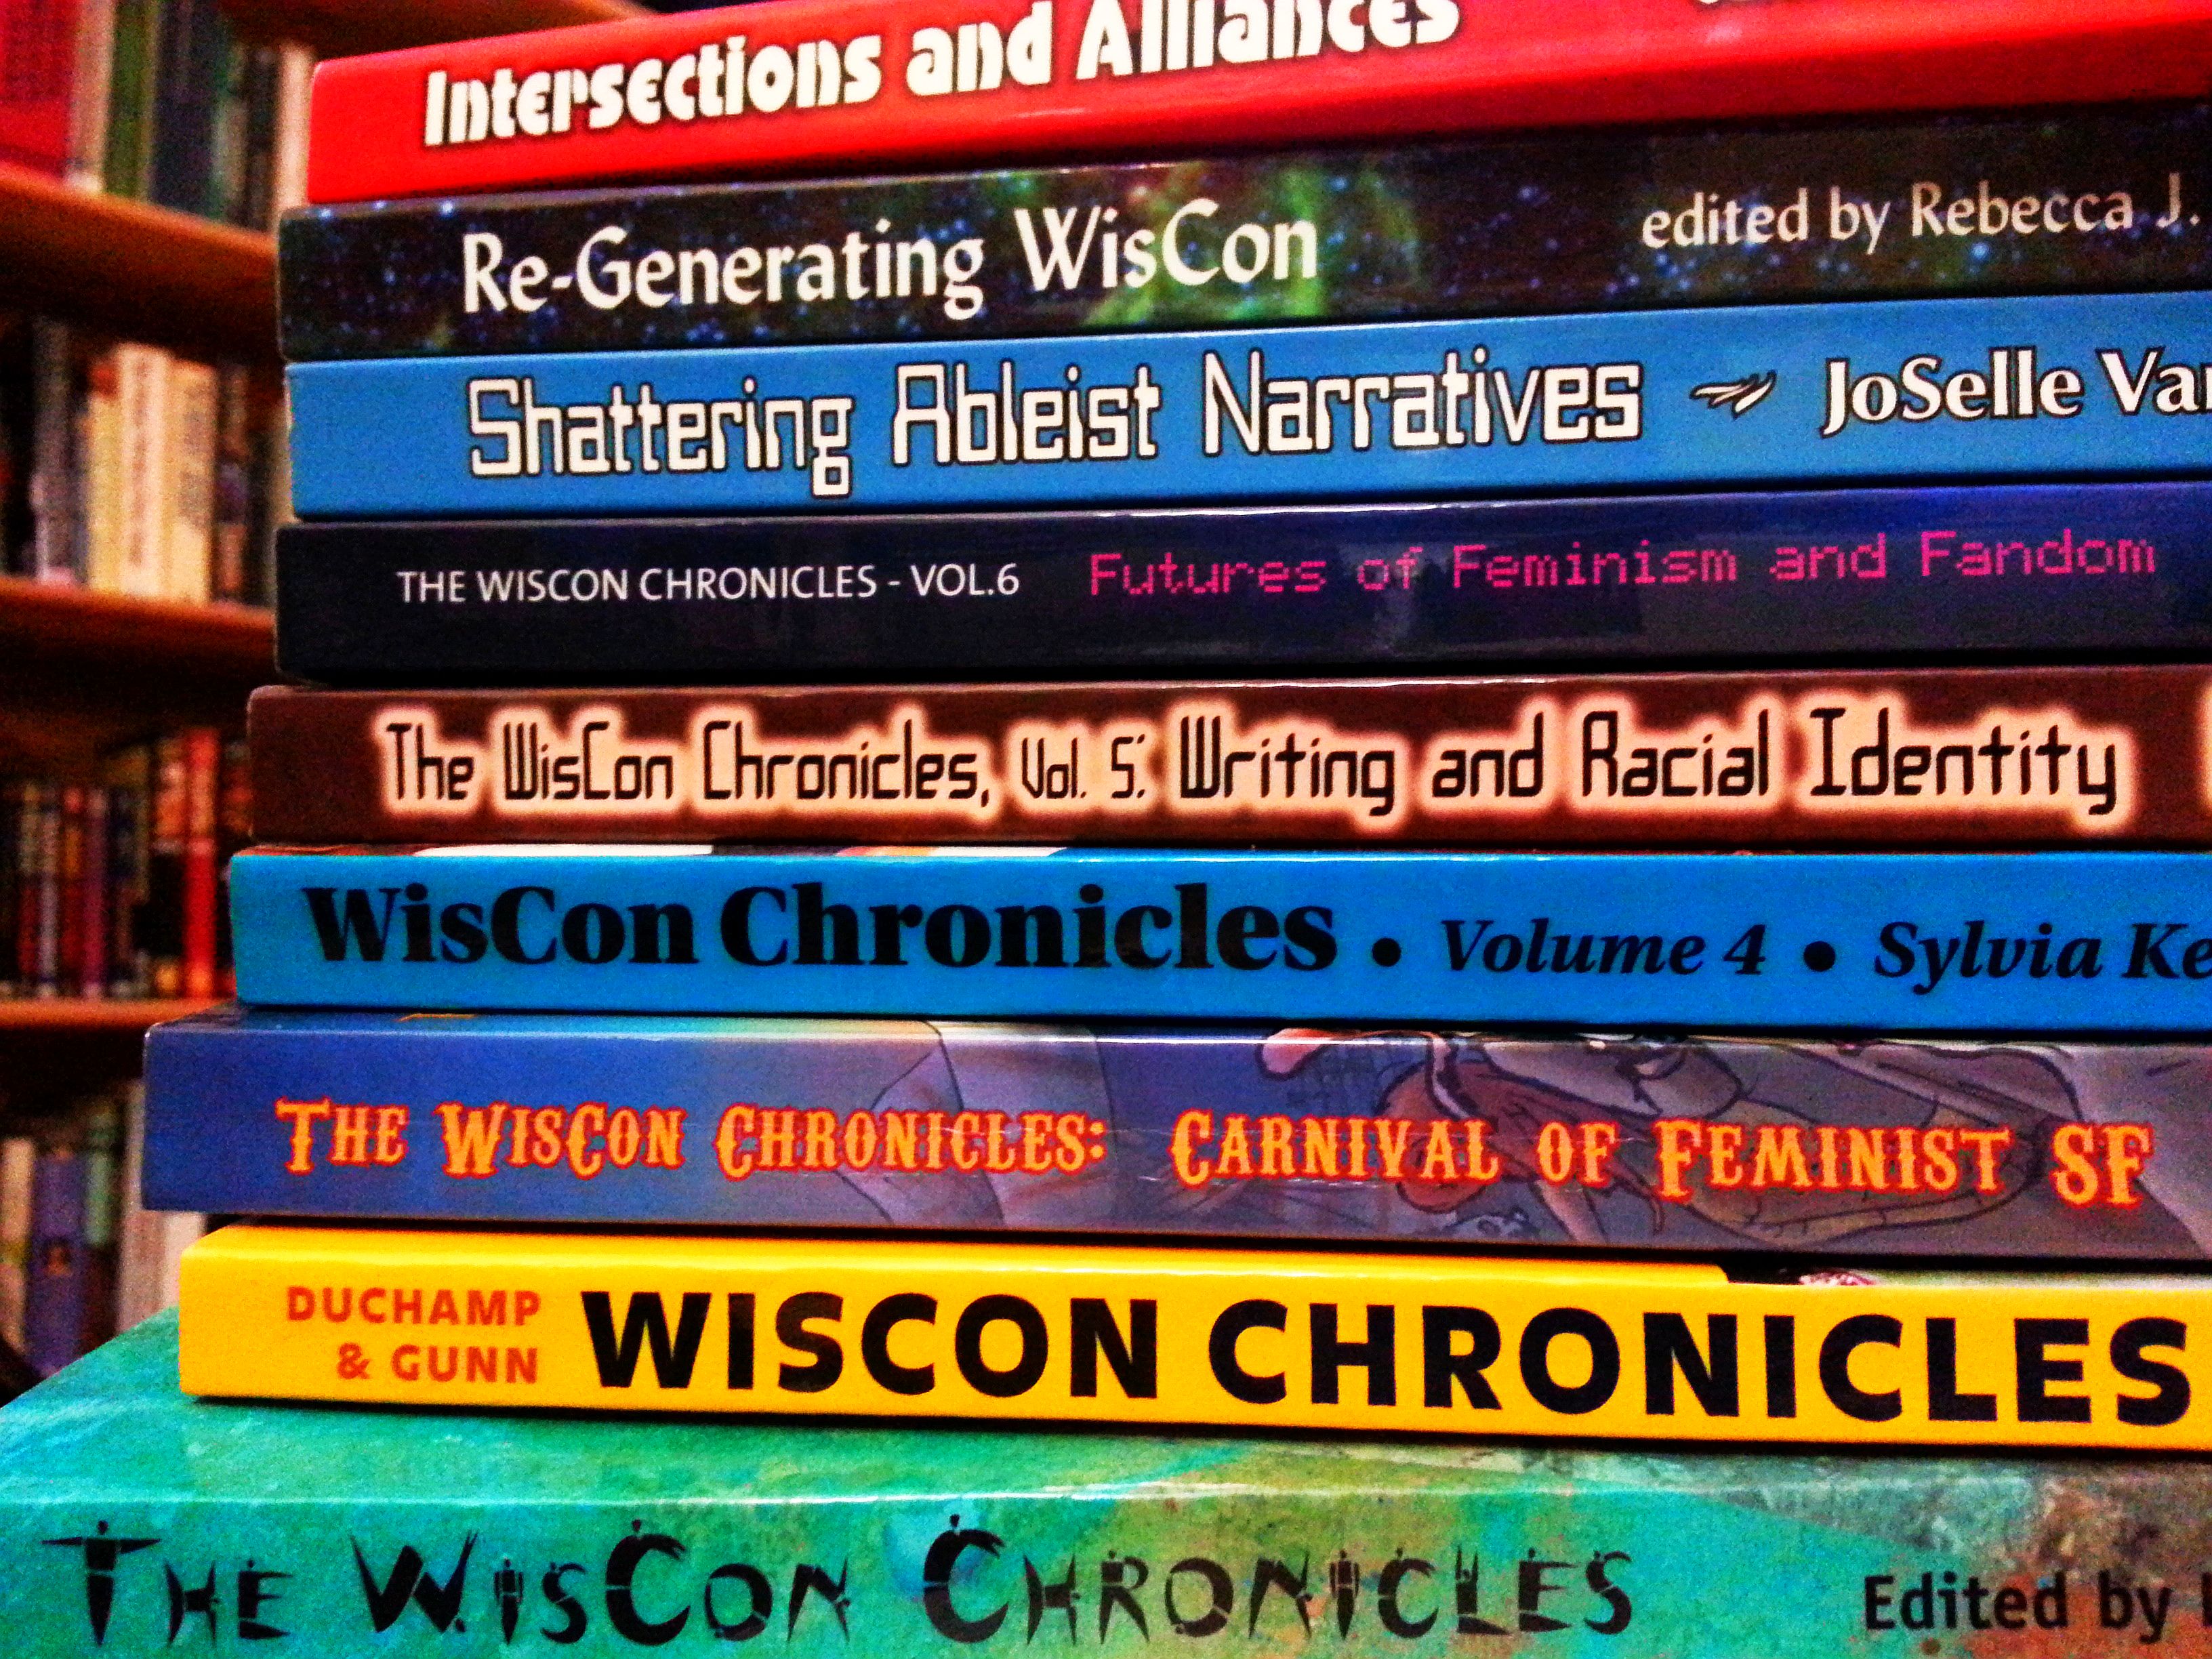 a stack of all volumes of the WisCon Chronicles -- 9 books with colorful spines